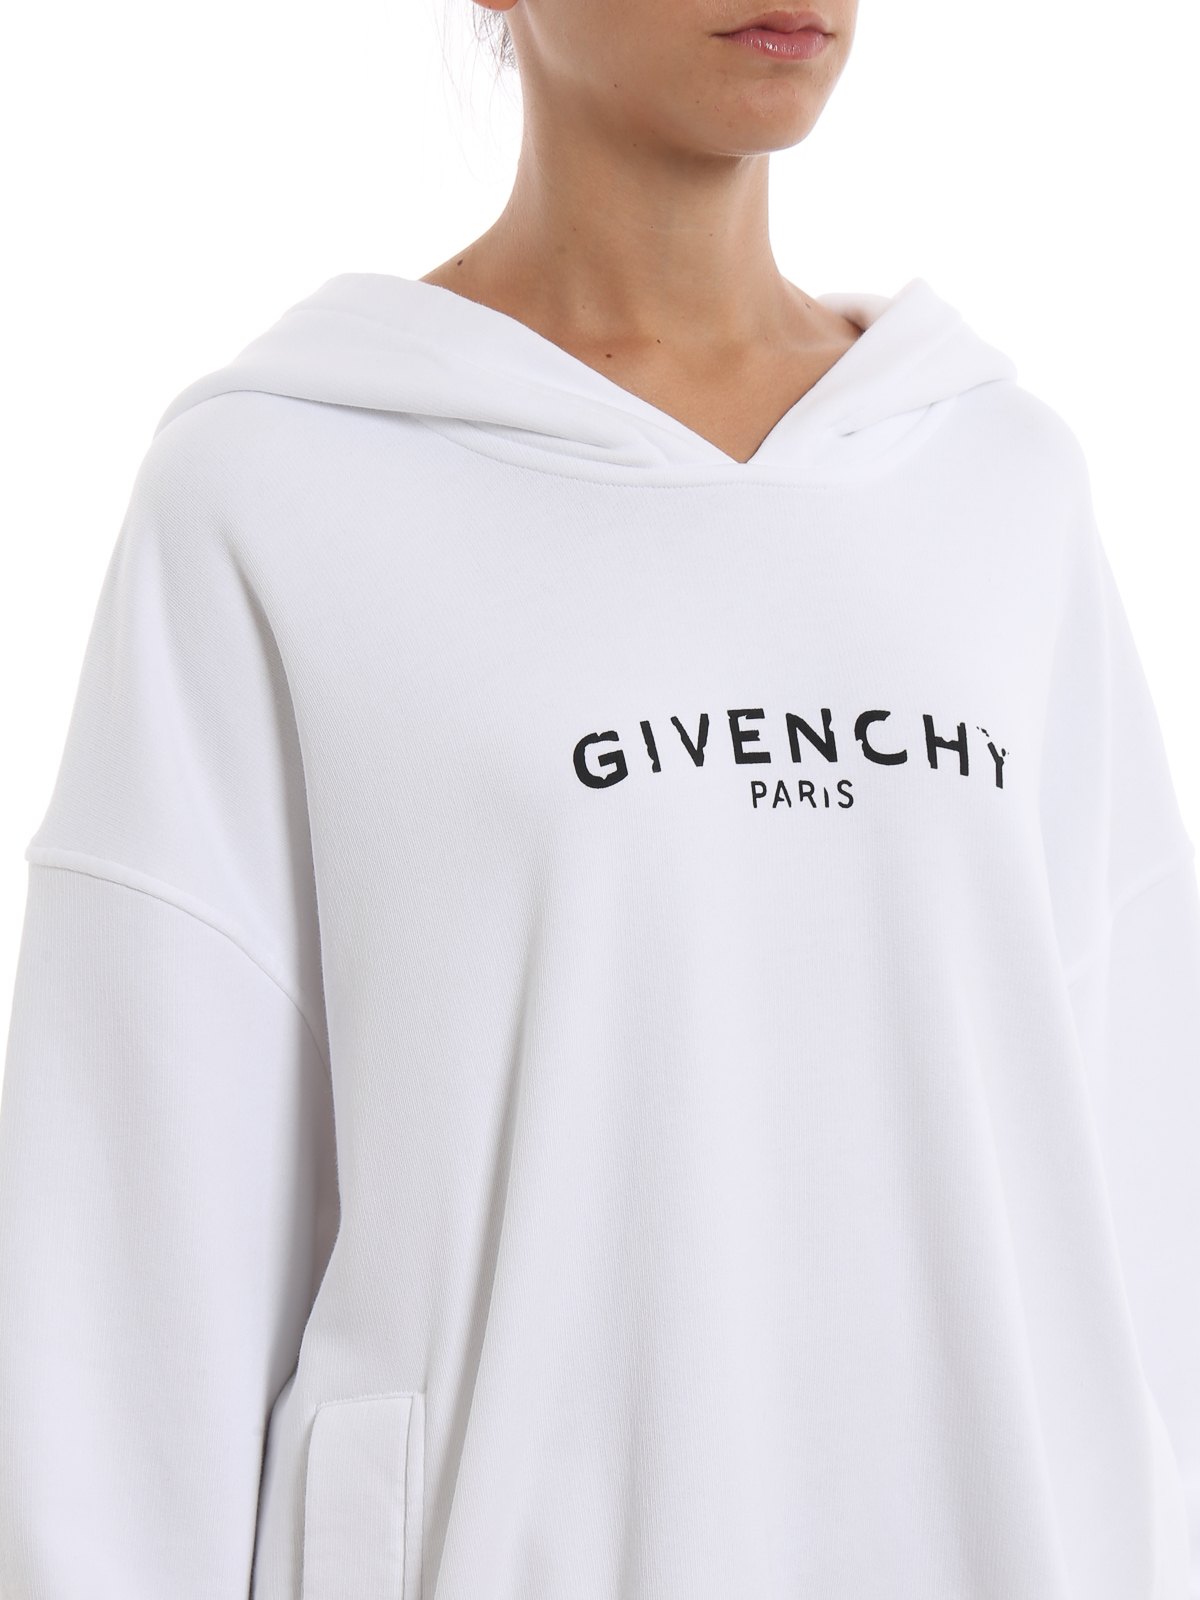 givenchy buy online